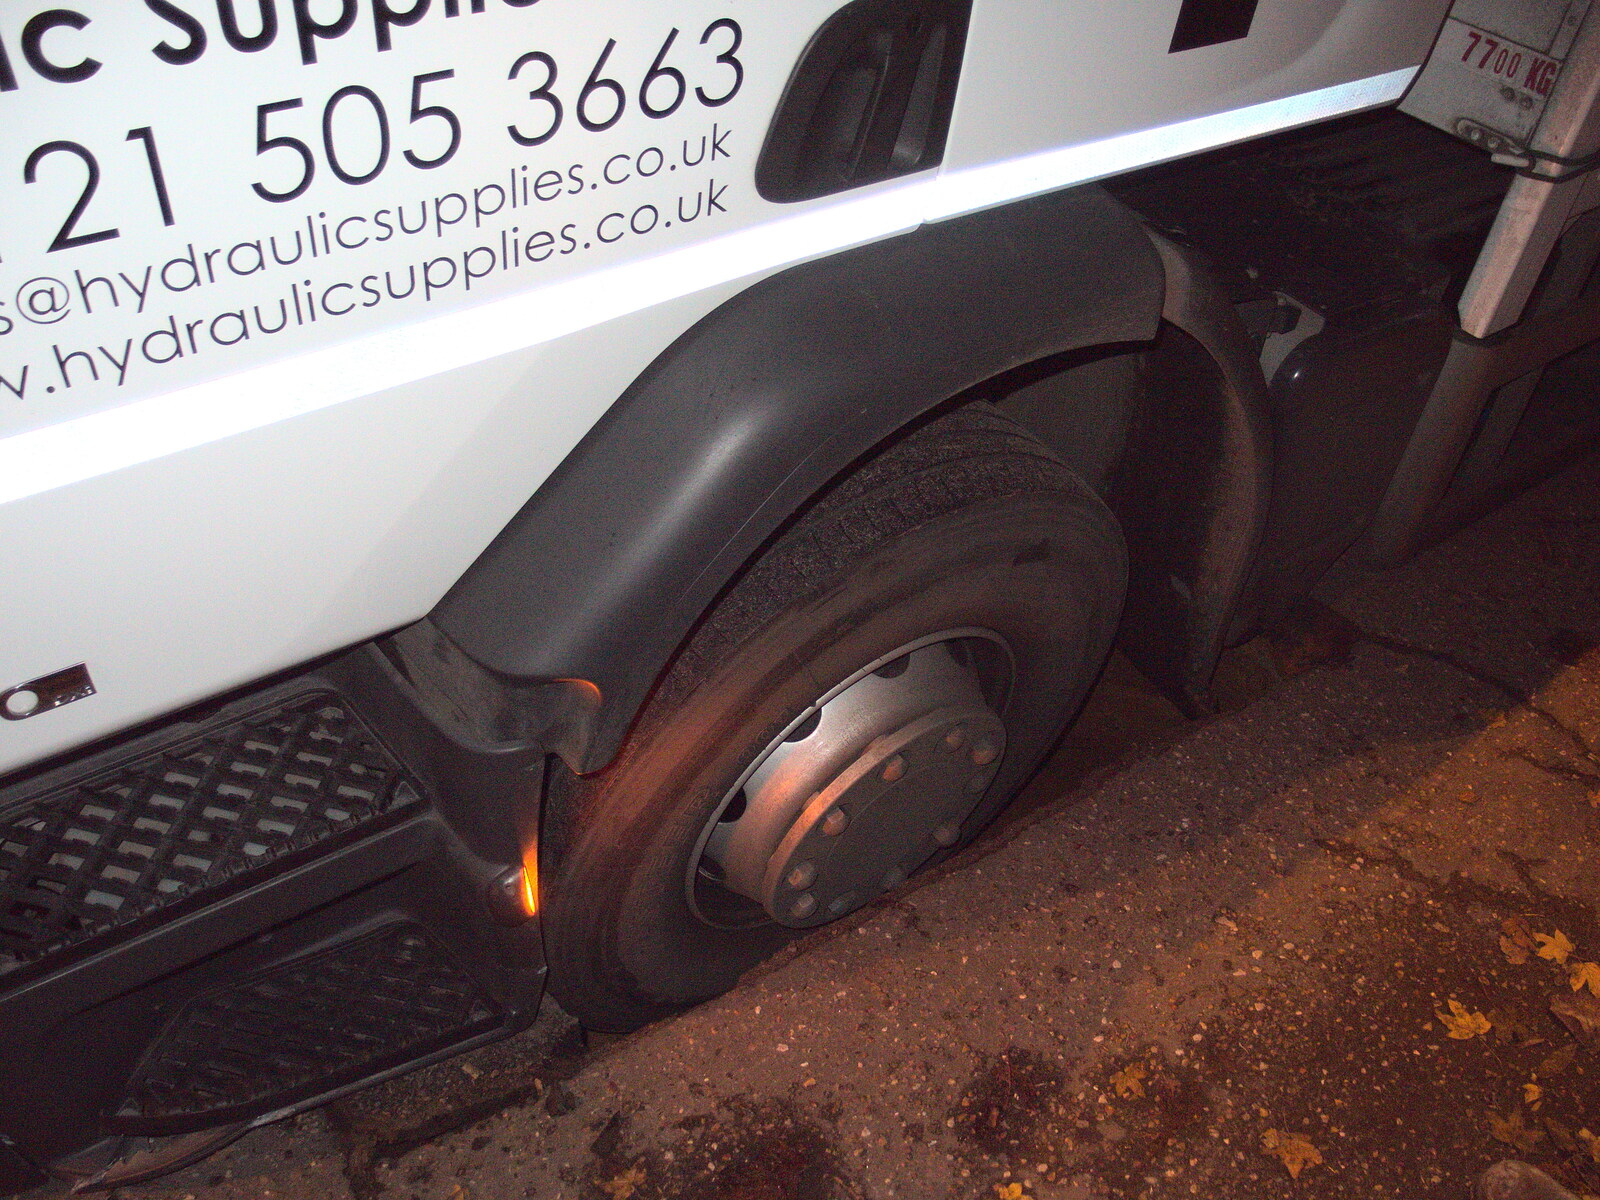 A lorry wheel is sunk in the pavement from The Lorry-Eating Pavement of Diss, Norfolk - 3rd December